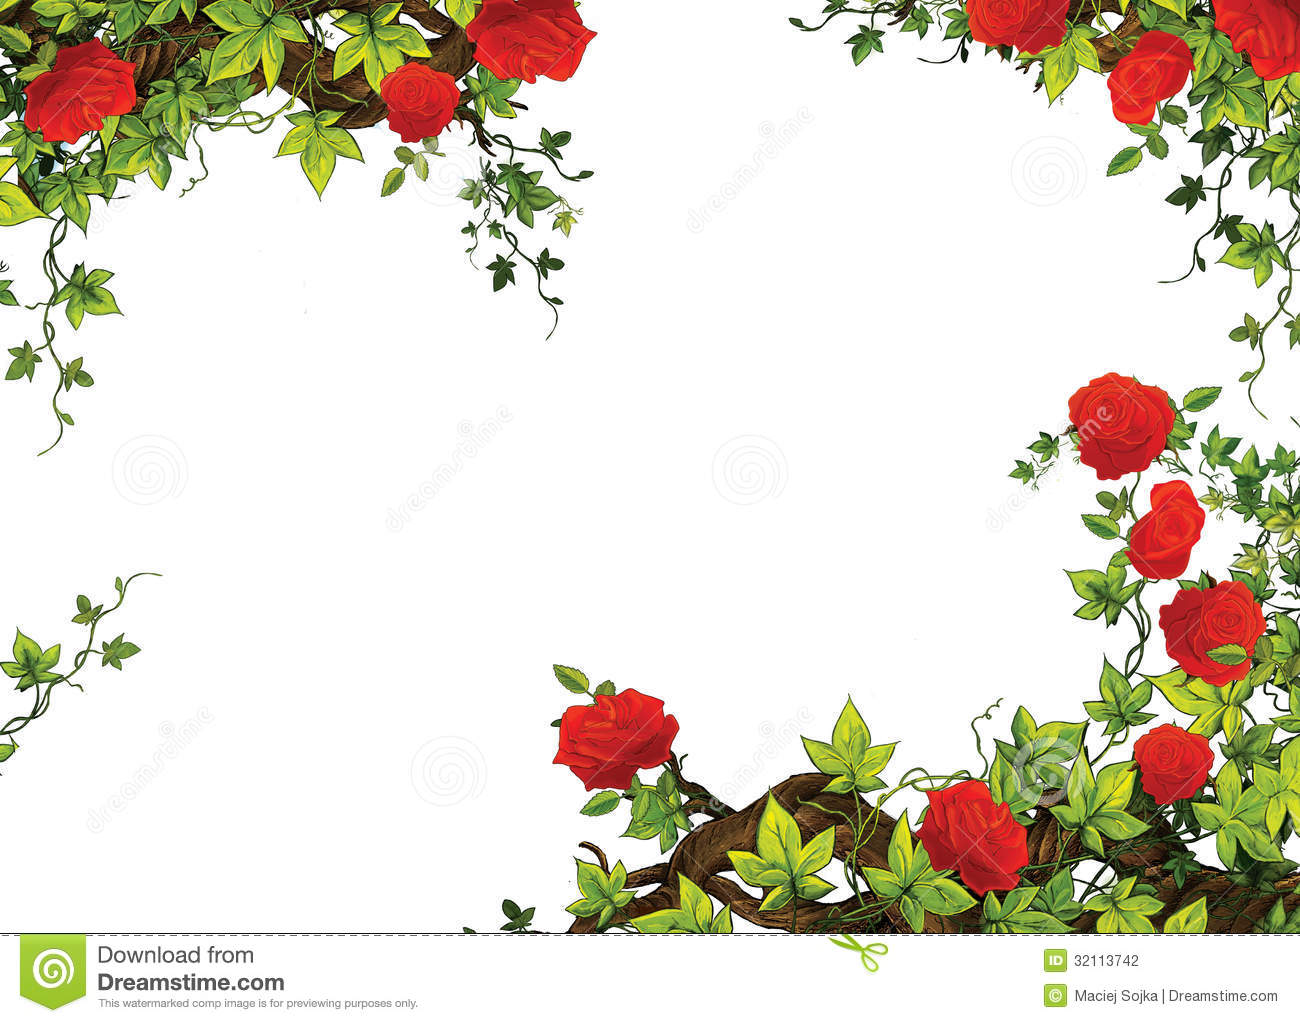 The Rose Frame   Border   Template   With Roses   Valentines   Fairy